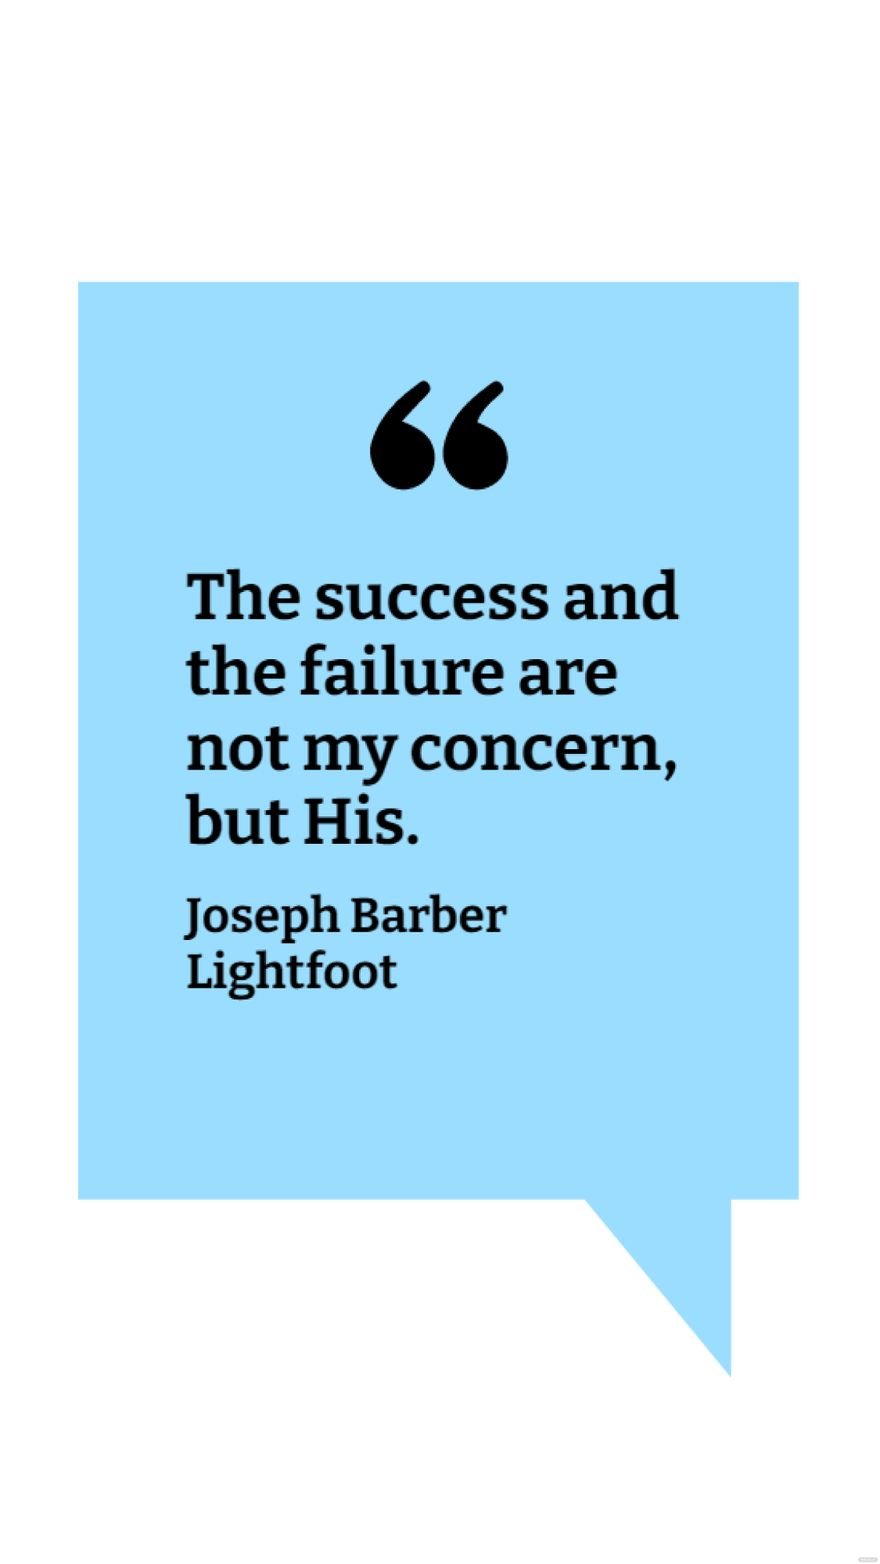 Joseph Barber Lightfoot - The success and the failure are not my concern, but His.